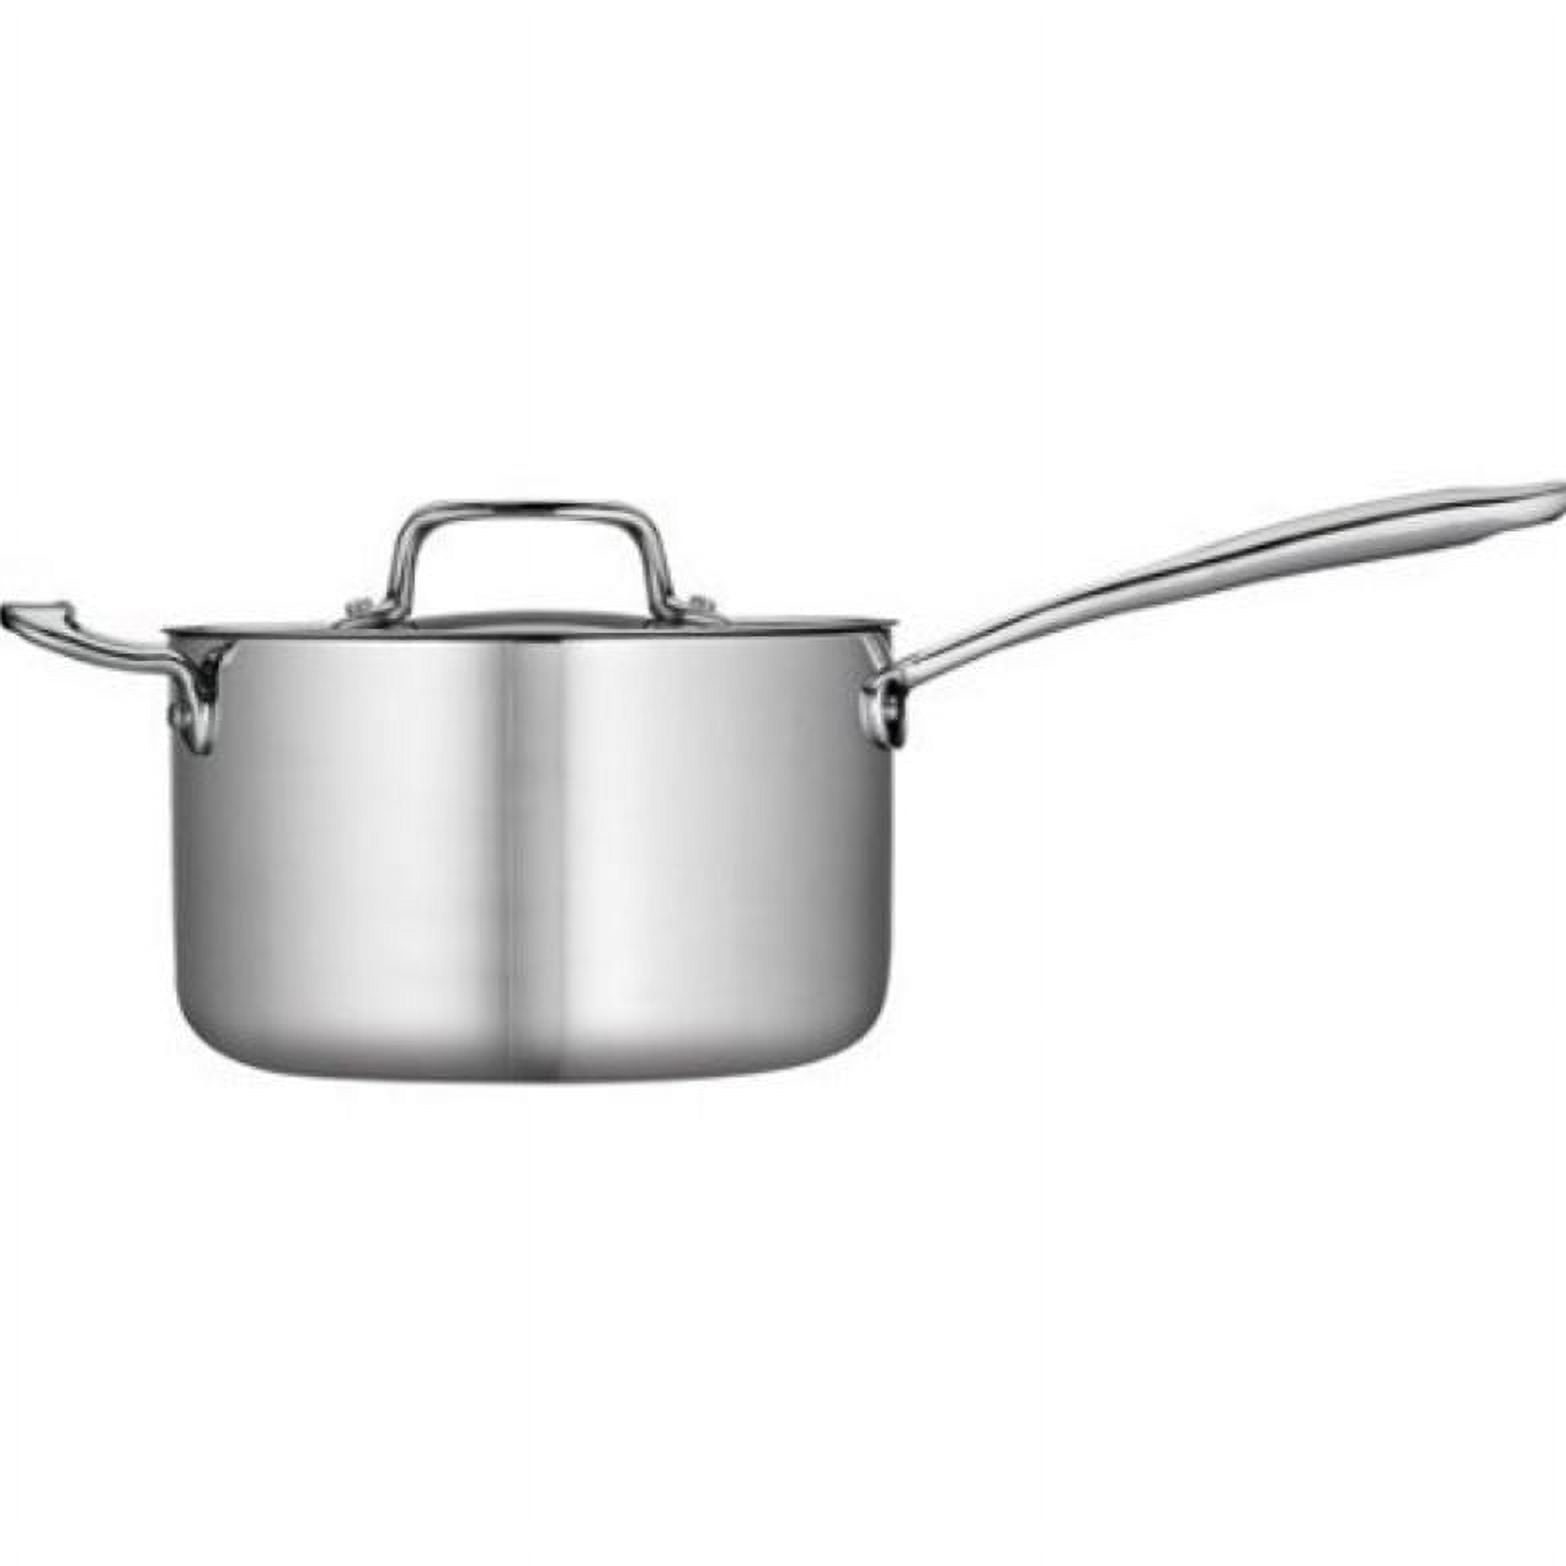 Fortune Candy 1.6-Quart Saucepan with Lid, Tri-Ply, 18/10 Stainless Steel, Advanced Welding , Dishwasher Safe, Induction Ready, Mirror Finish, Silver